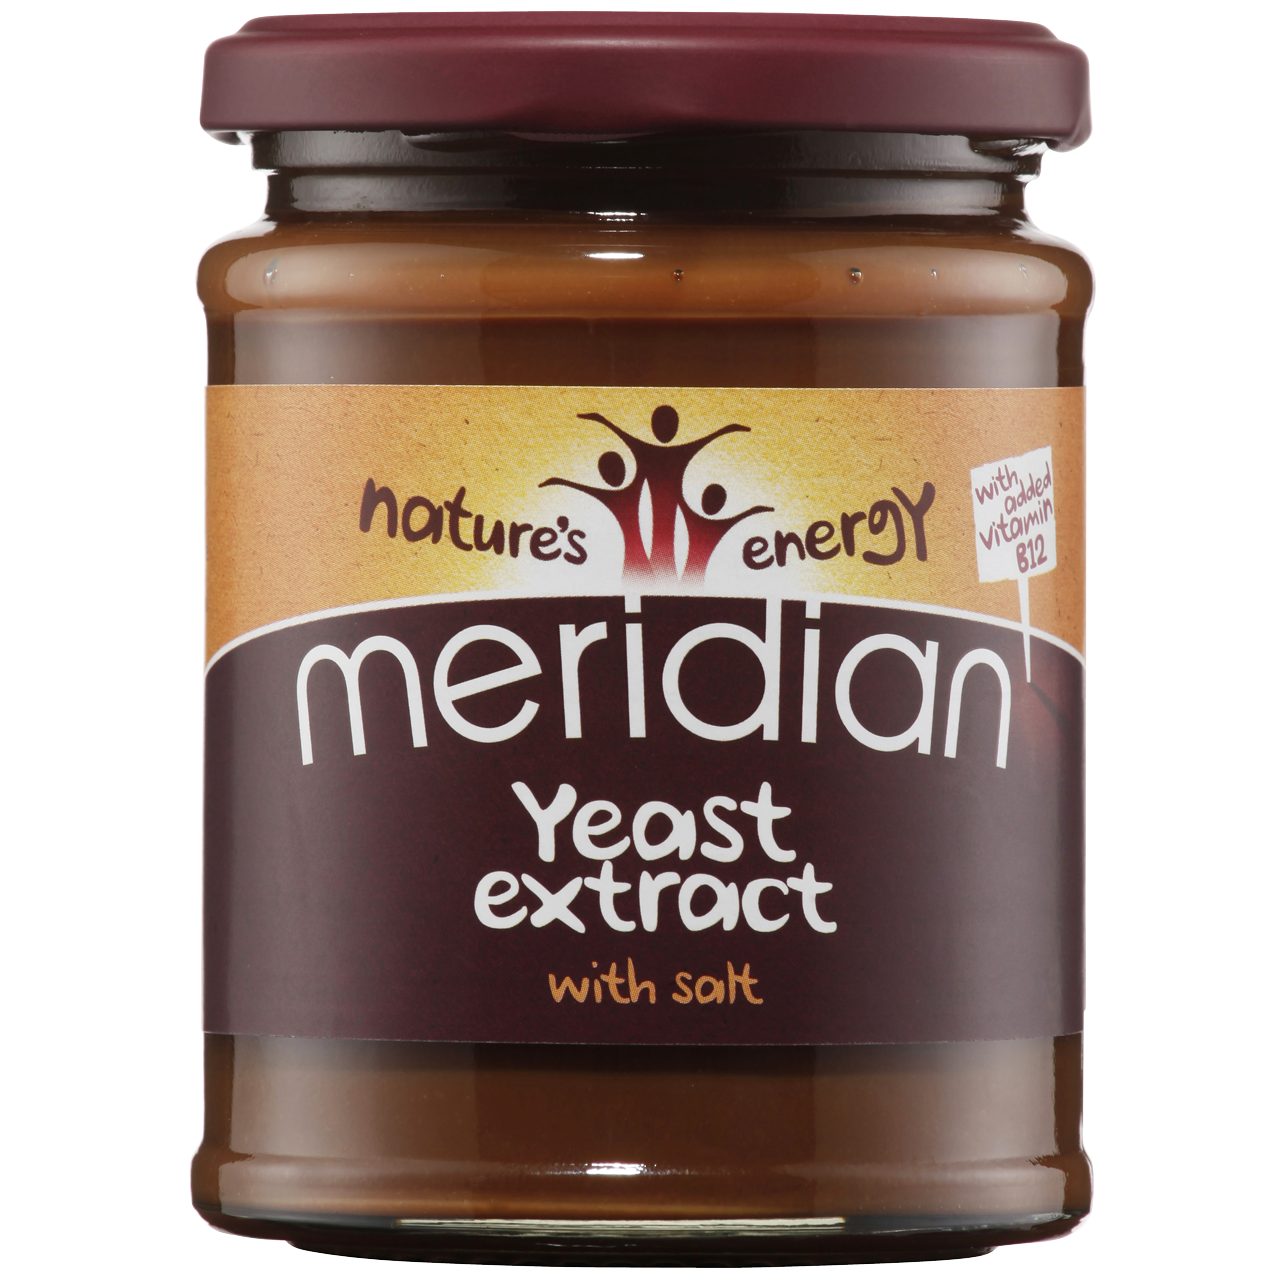 Meridian Yeast Extract - with salt - Just Natural